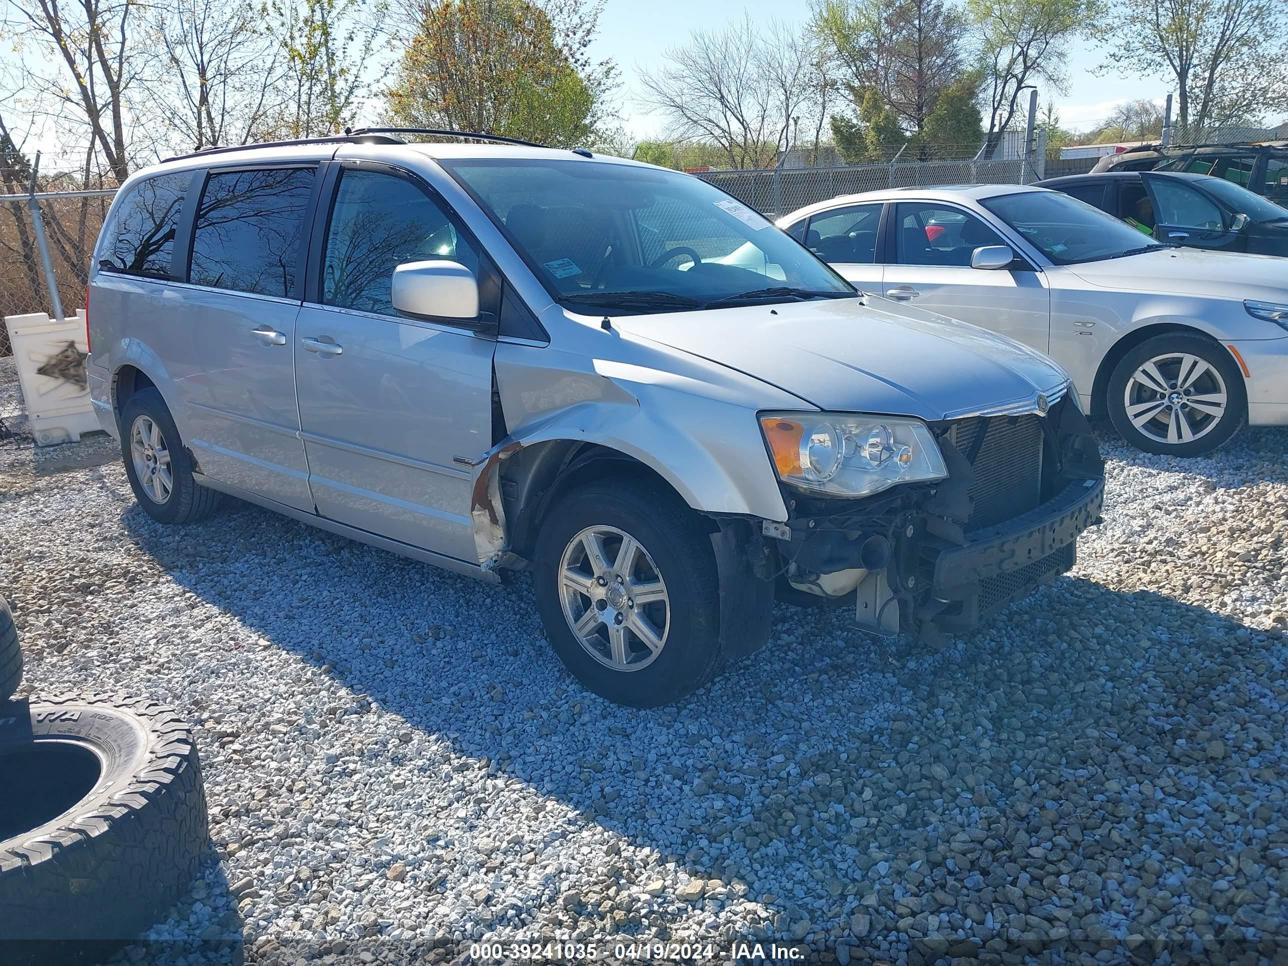 2A8HR54P68R818453  - CHRYSLER TOWN & COUNTRY  2008 IMG - 0